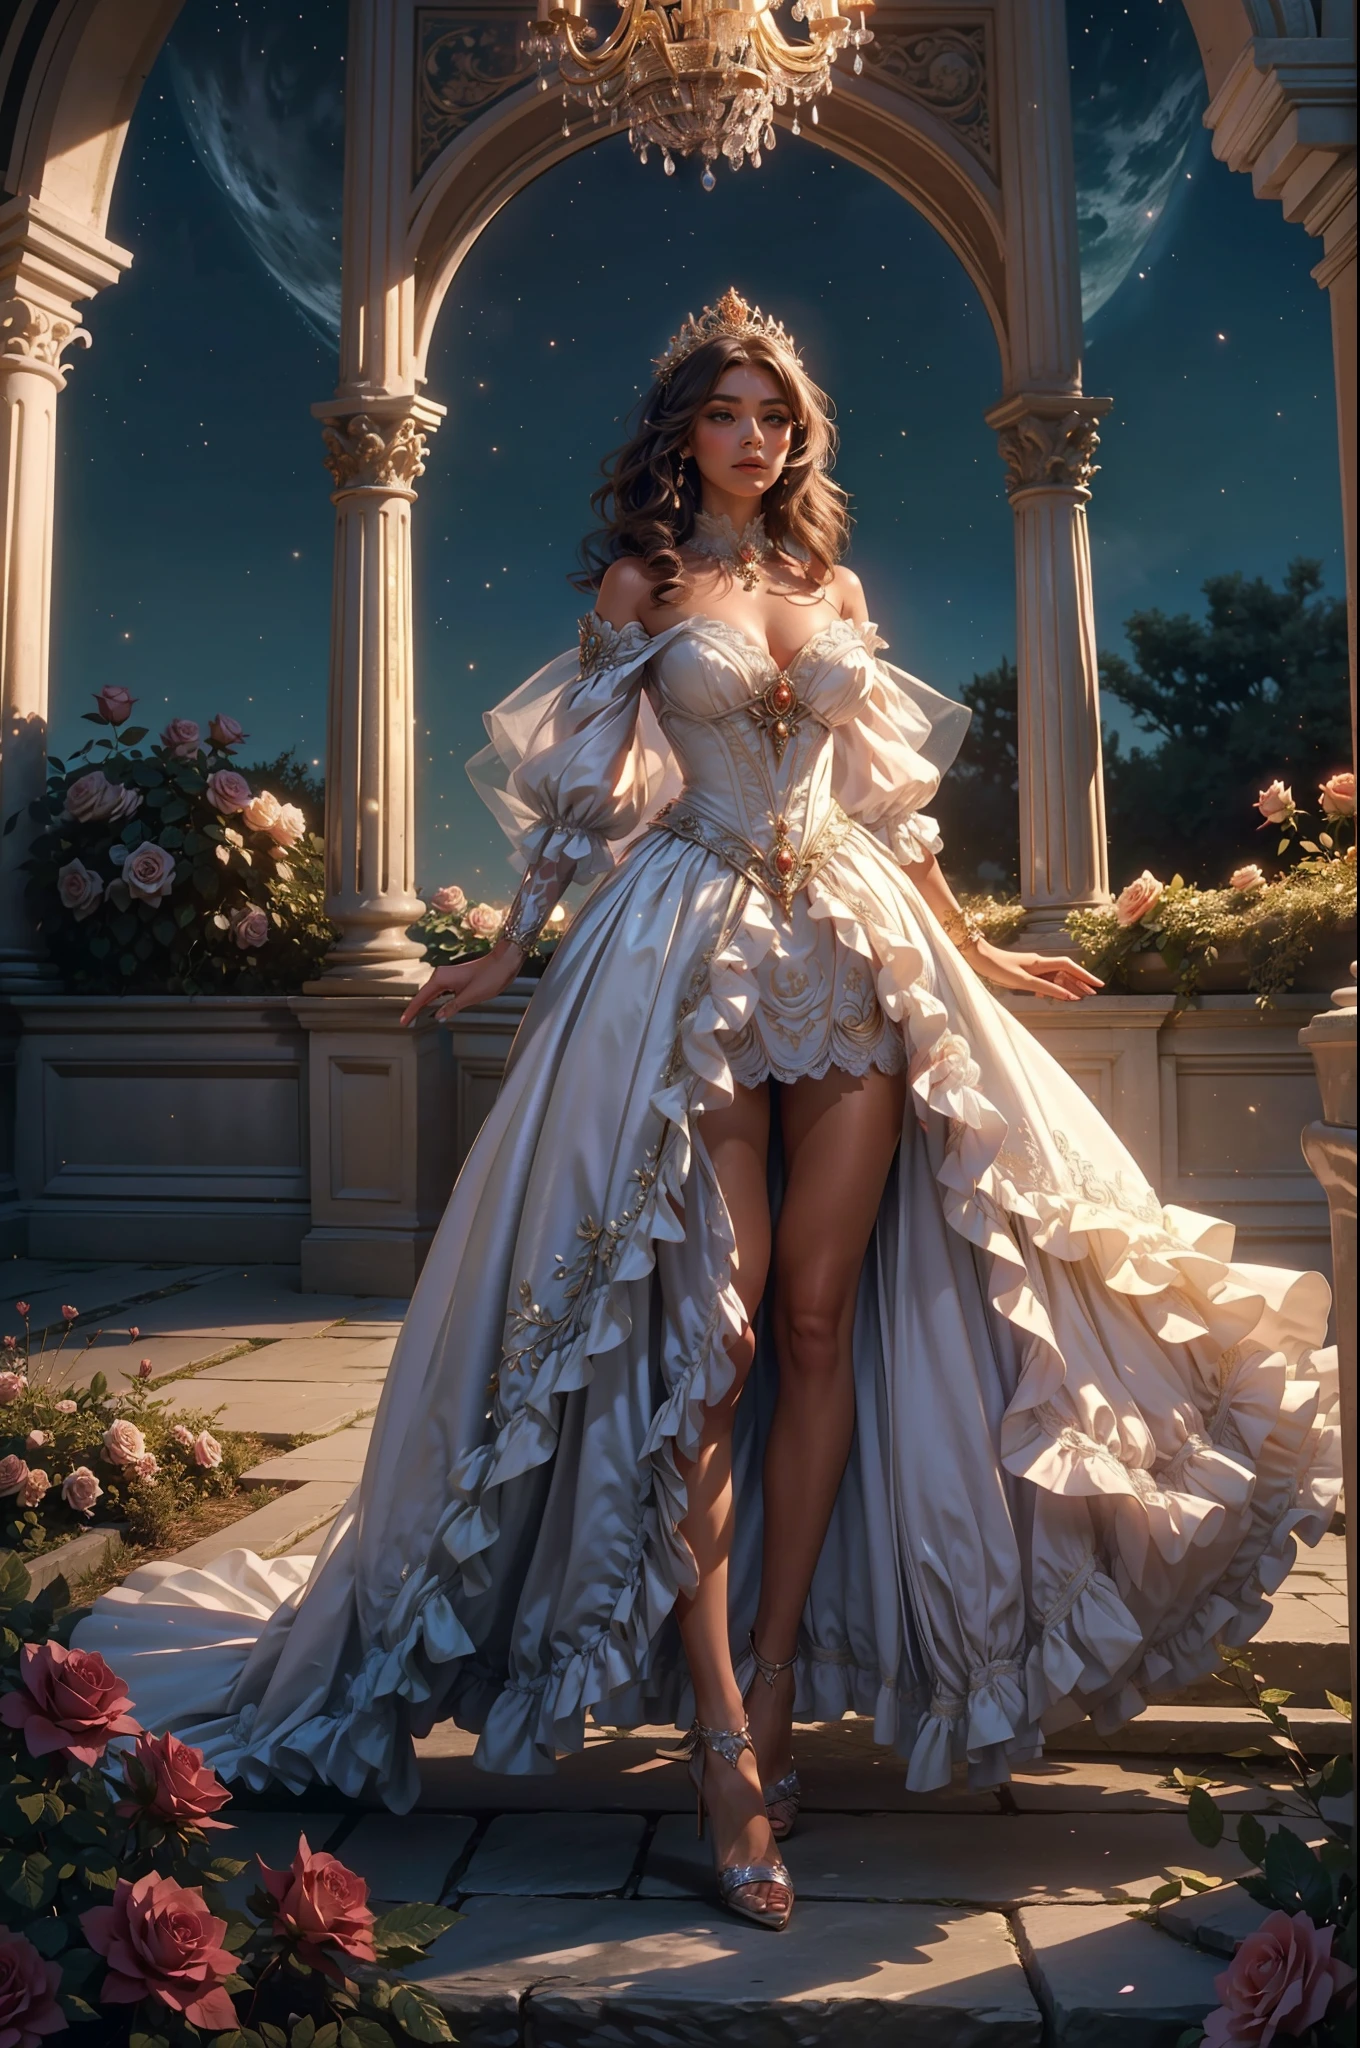 The most beautiful rose bush imaginable and an incredibly elegant young woman, superbly hairstyled, Espectacularmente maquillada y con un vestido deslumbrantemente fabuloso. In a dream garden on a magical night. (obra maestra) (mejor calidad)